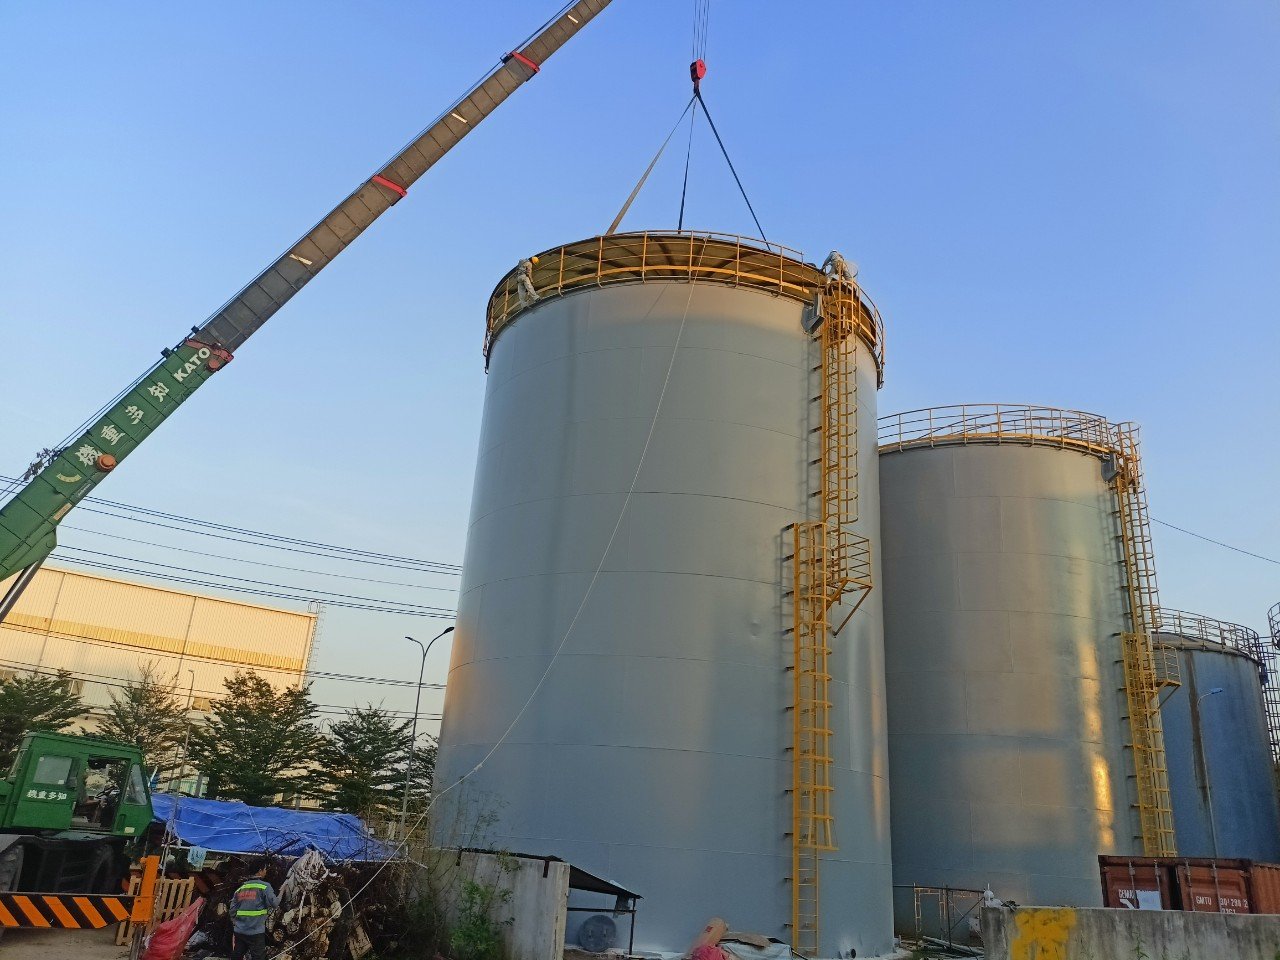 Install and commisioning for FRP product (FRP Tanks, FRP Pipe, FRP Structure, FRP Fan Stack, ...)